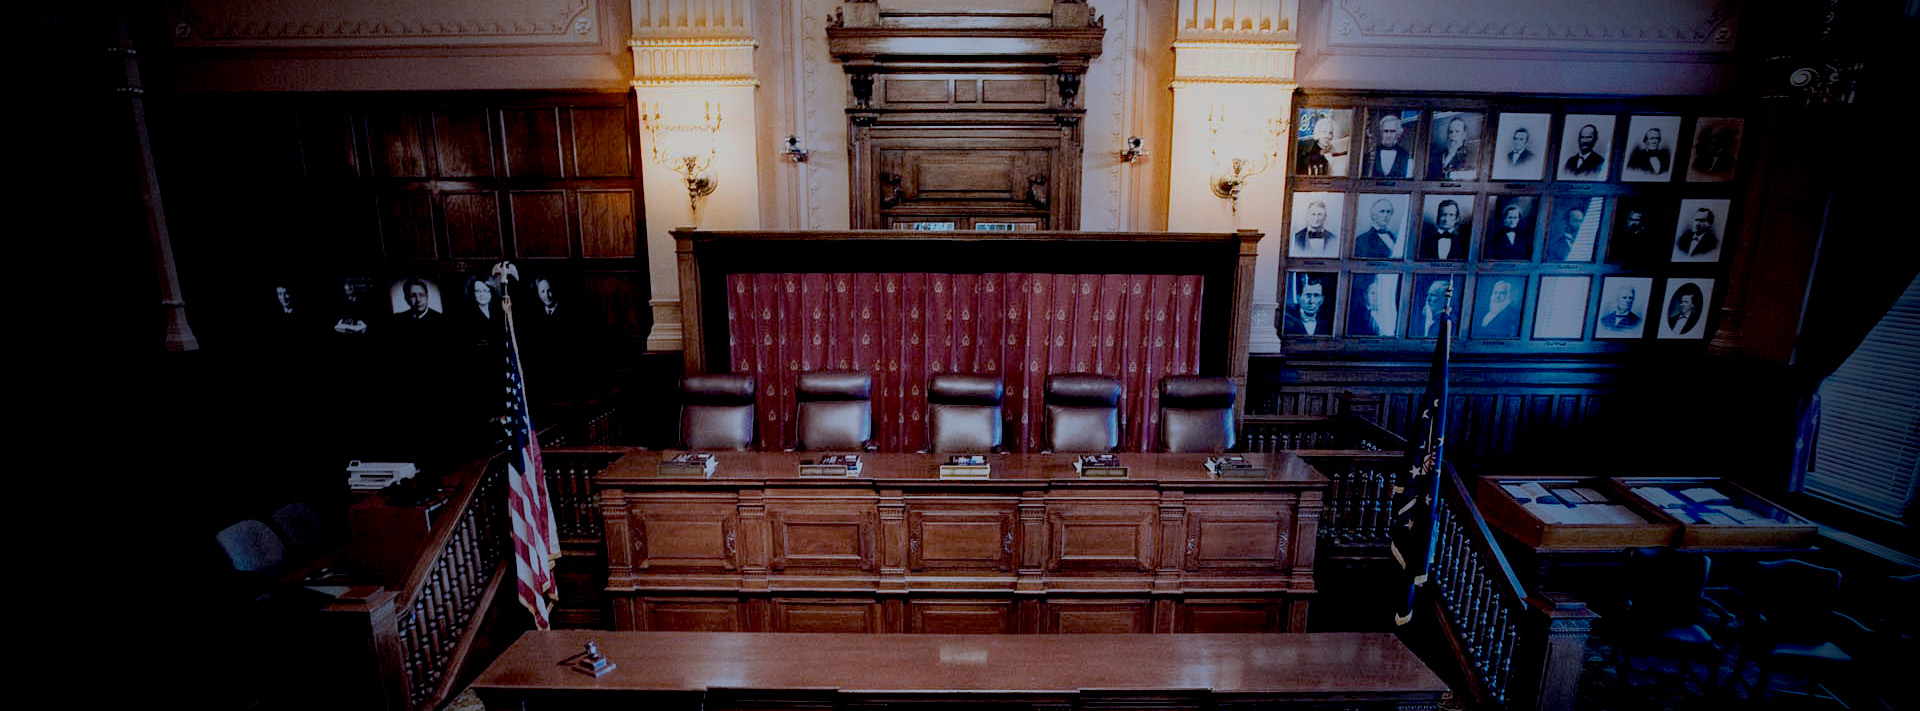 Indiana Supreme Court courtroom.